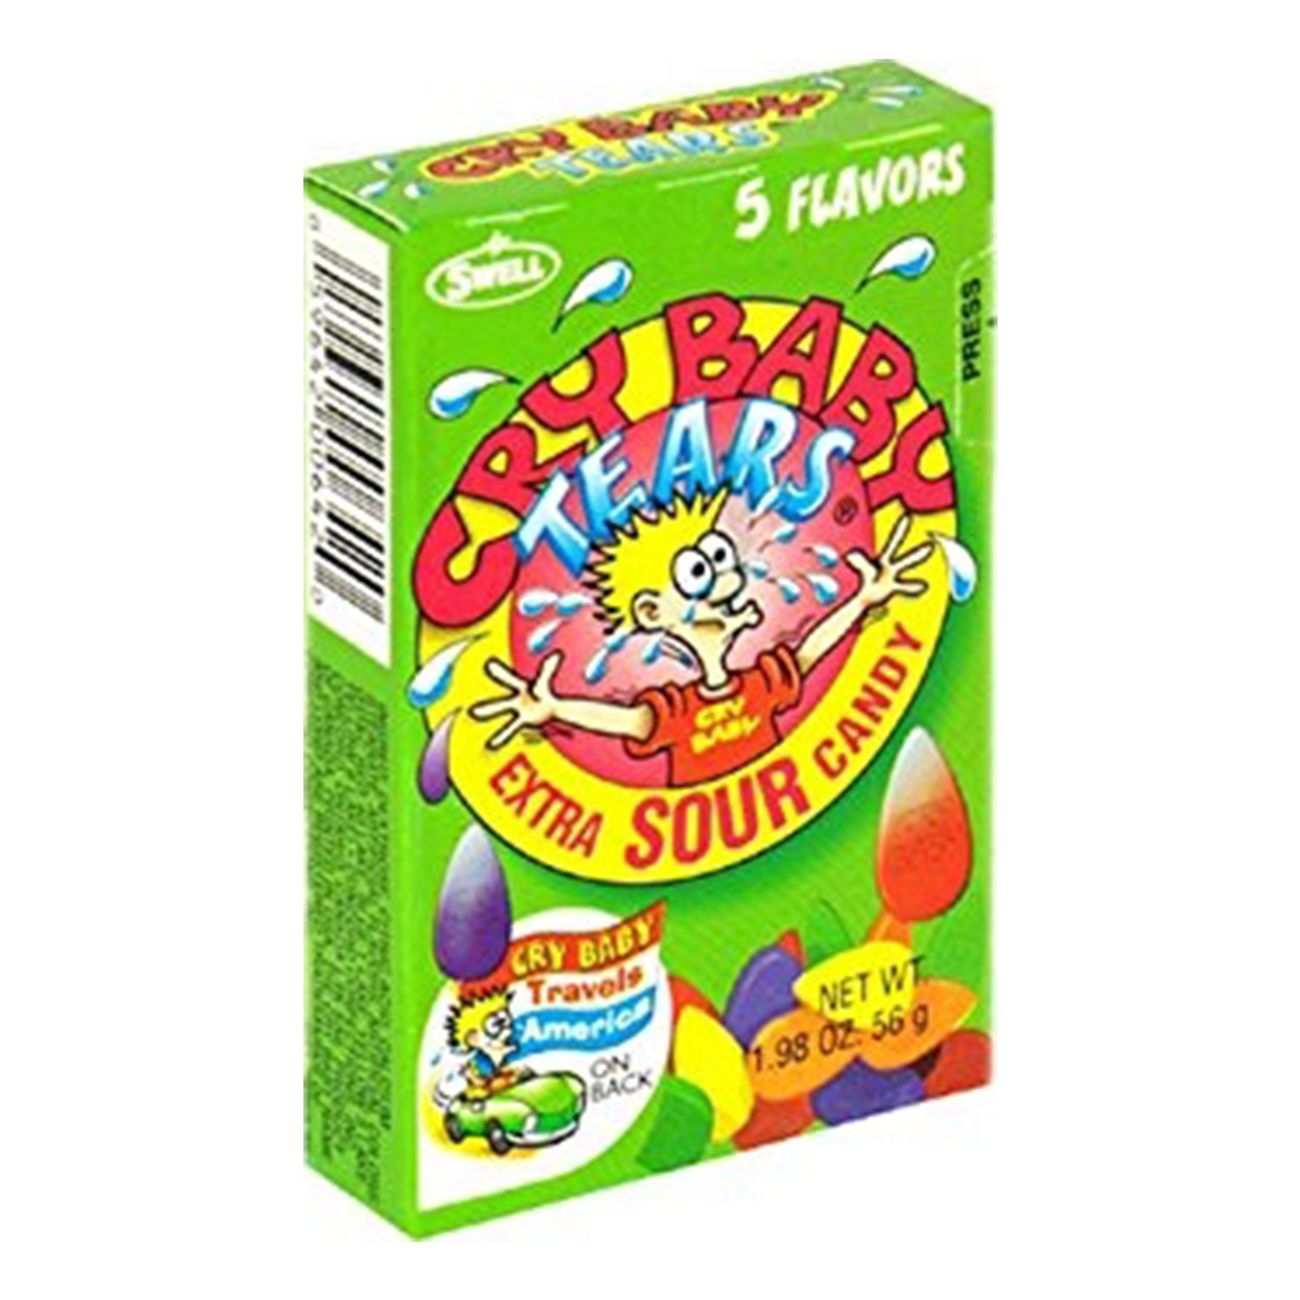 cry-baby-extra-sour-tears-5-flavors-94771-1